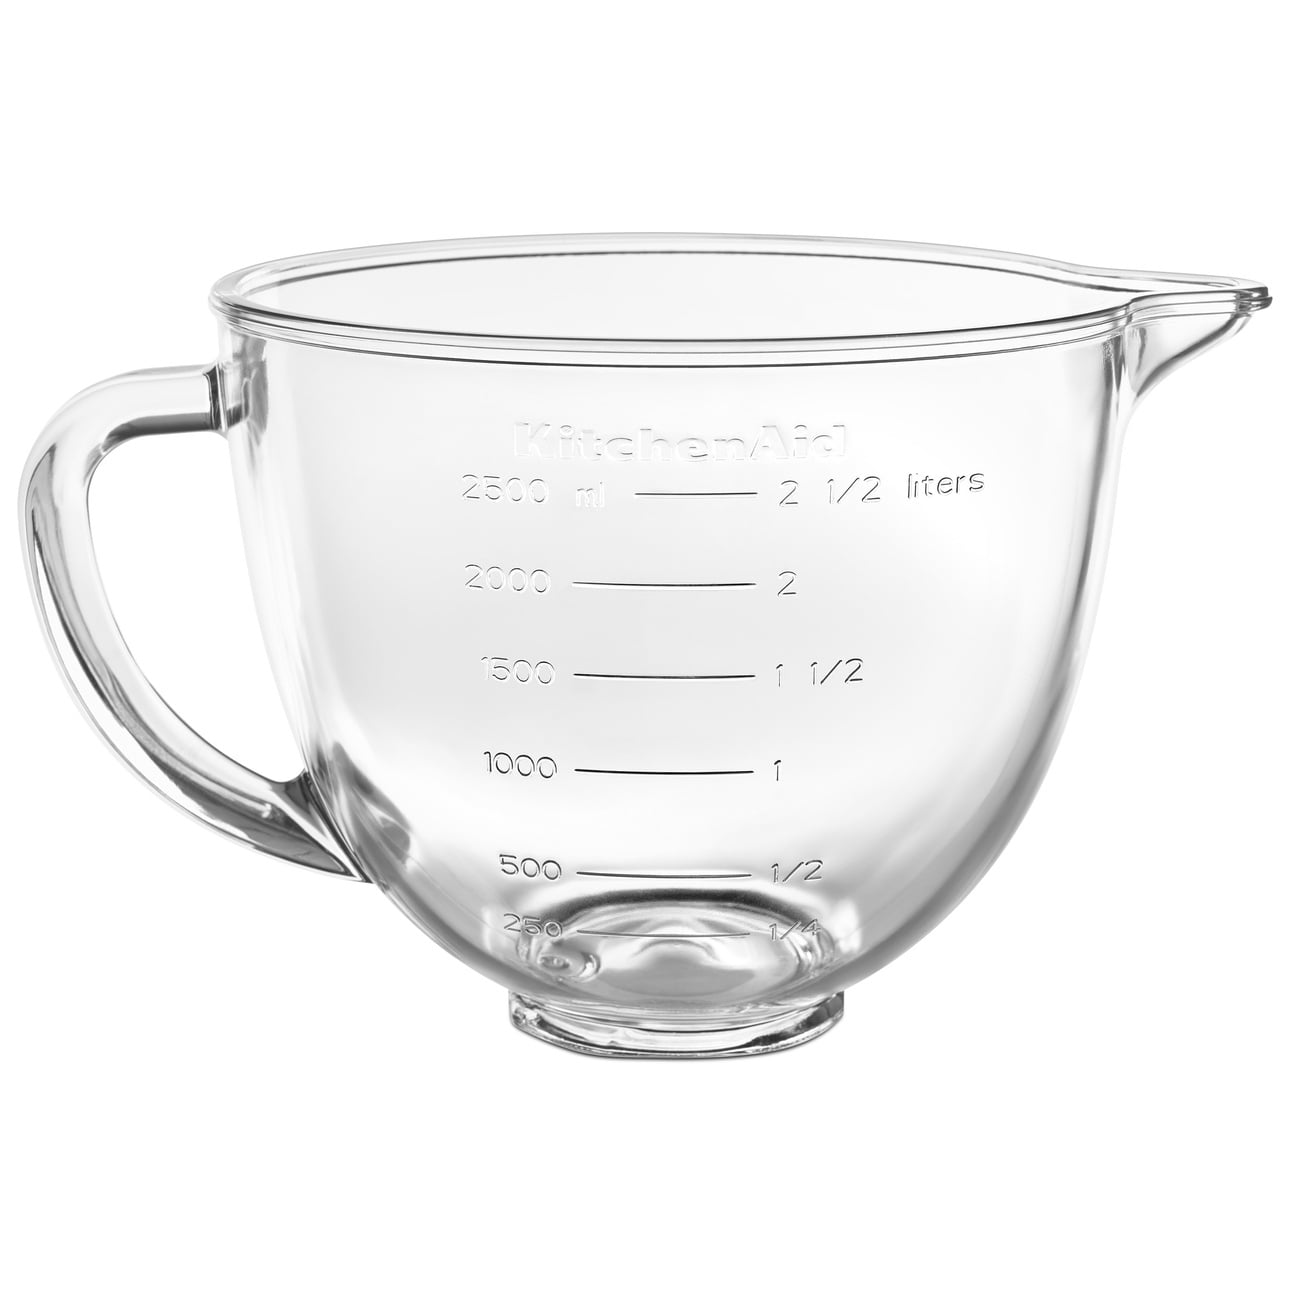 NEW KitchenAid Mixer White 5QT + 12 cup glass mixer bowl with lid